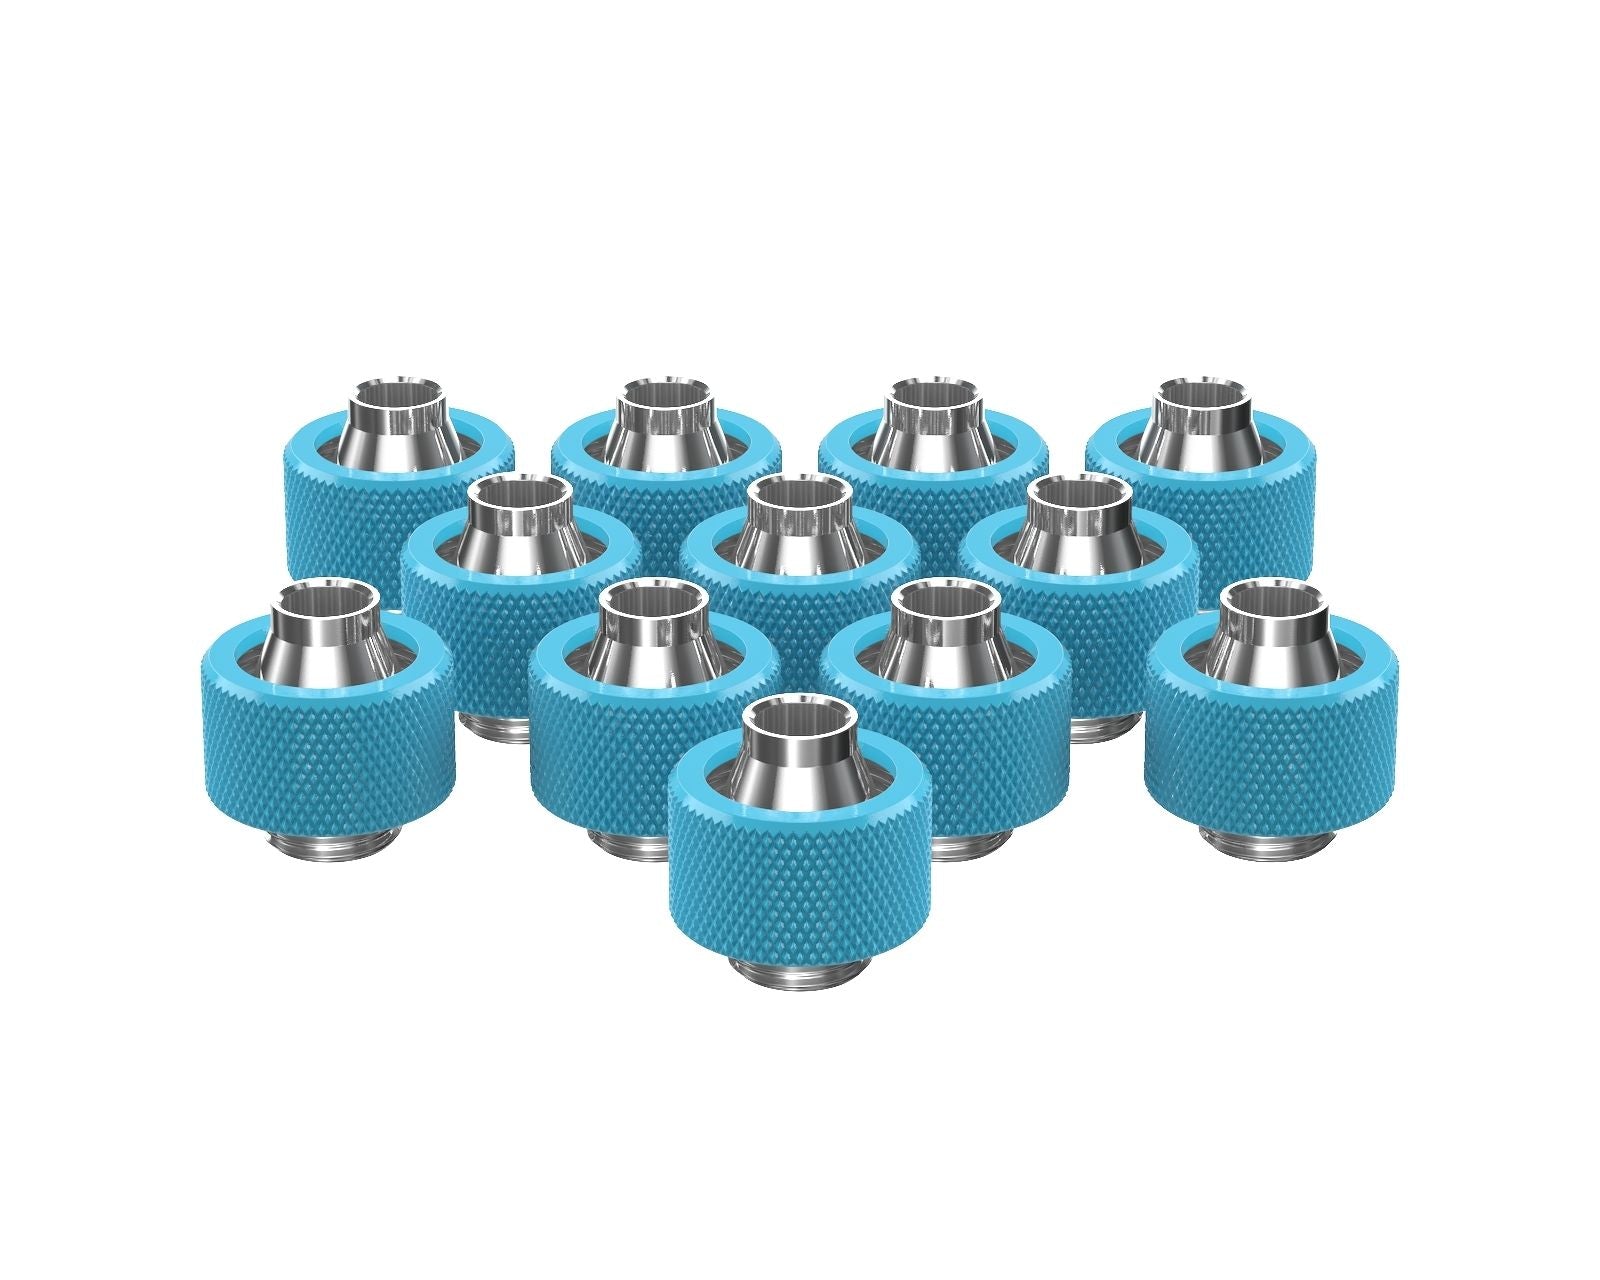 PrimoChill SecureFit SX - Premium Compression Fitting For 3/8in ID x 5/8in OD Flexible Tubing 12 Pack (F-SFSX58-12) - Available in 20+ Colors, Custom Watercooling Loop Ready - Sky Blue